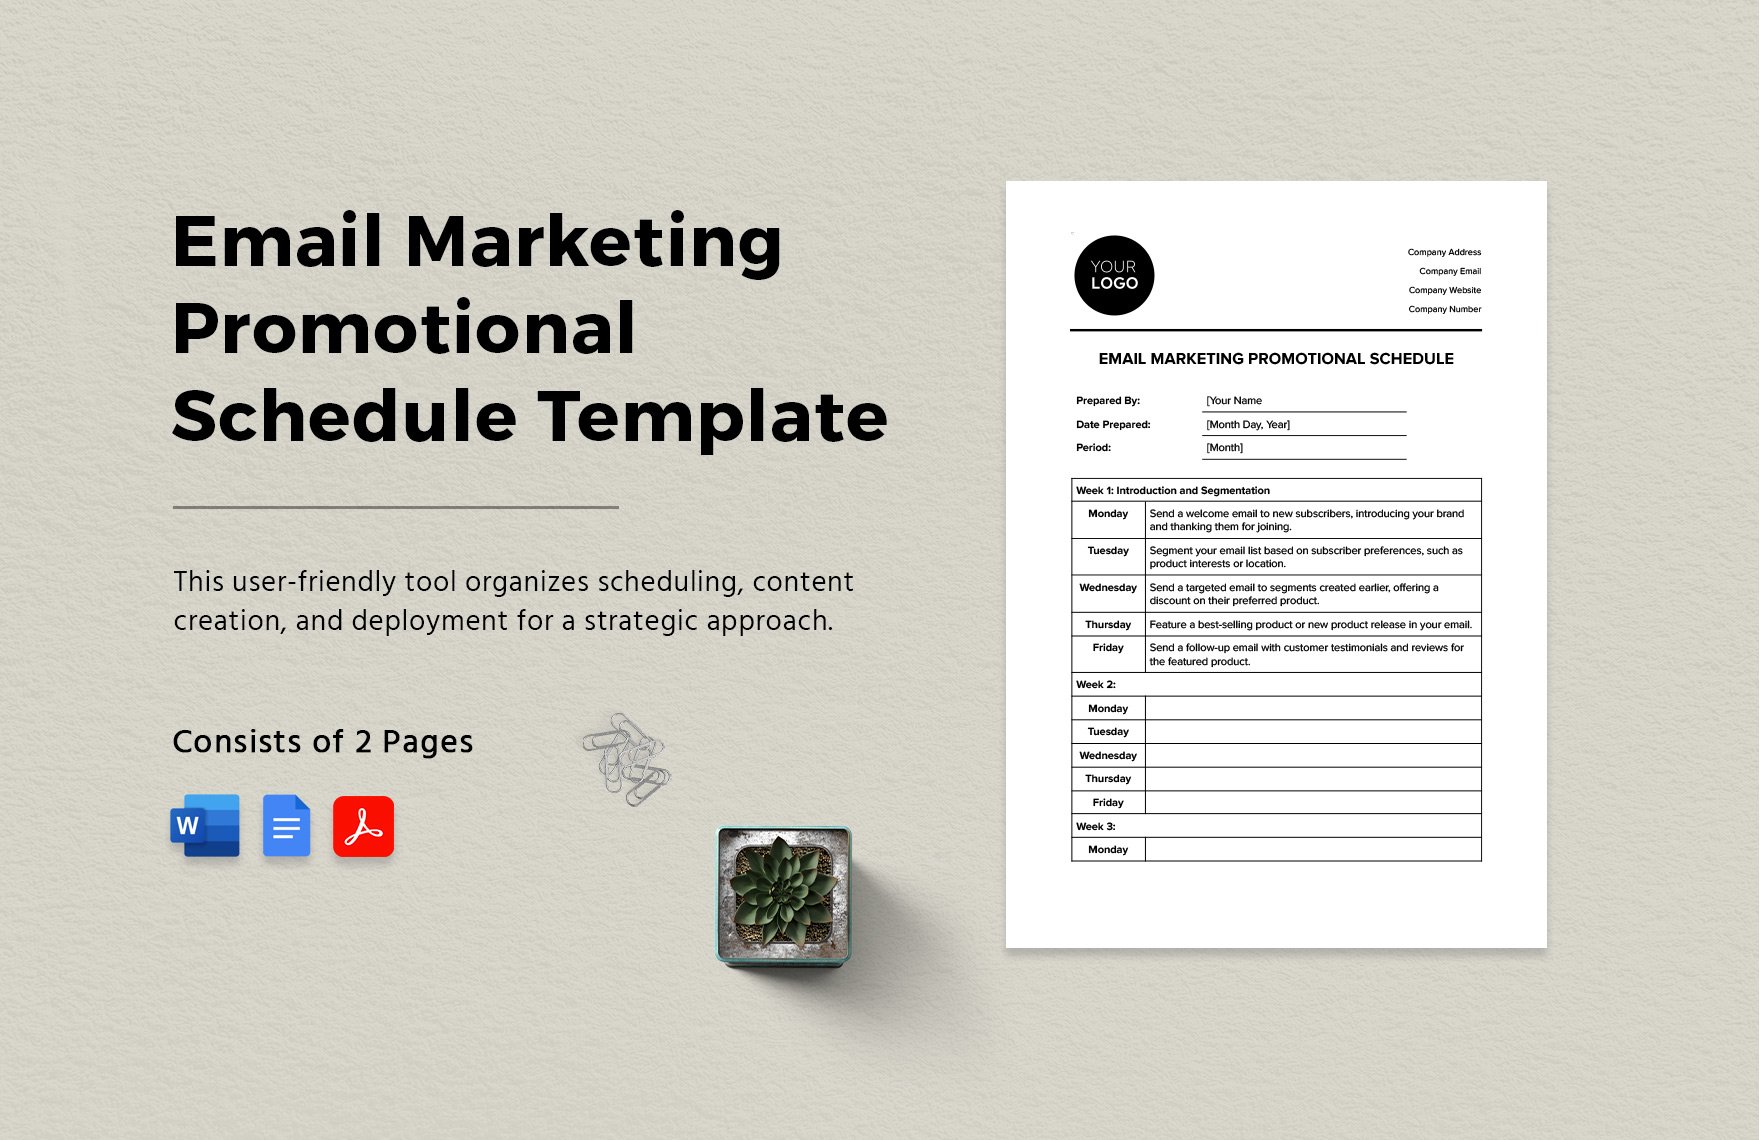 Email Marketing Promotional Schedule Template